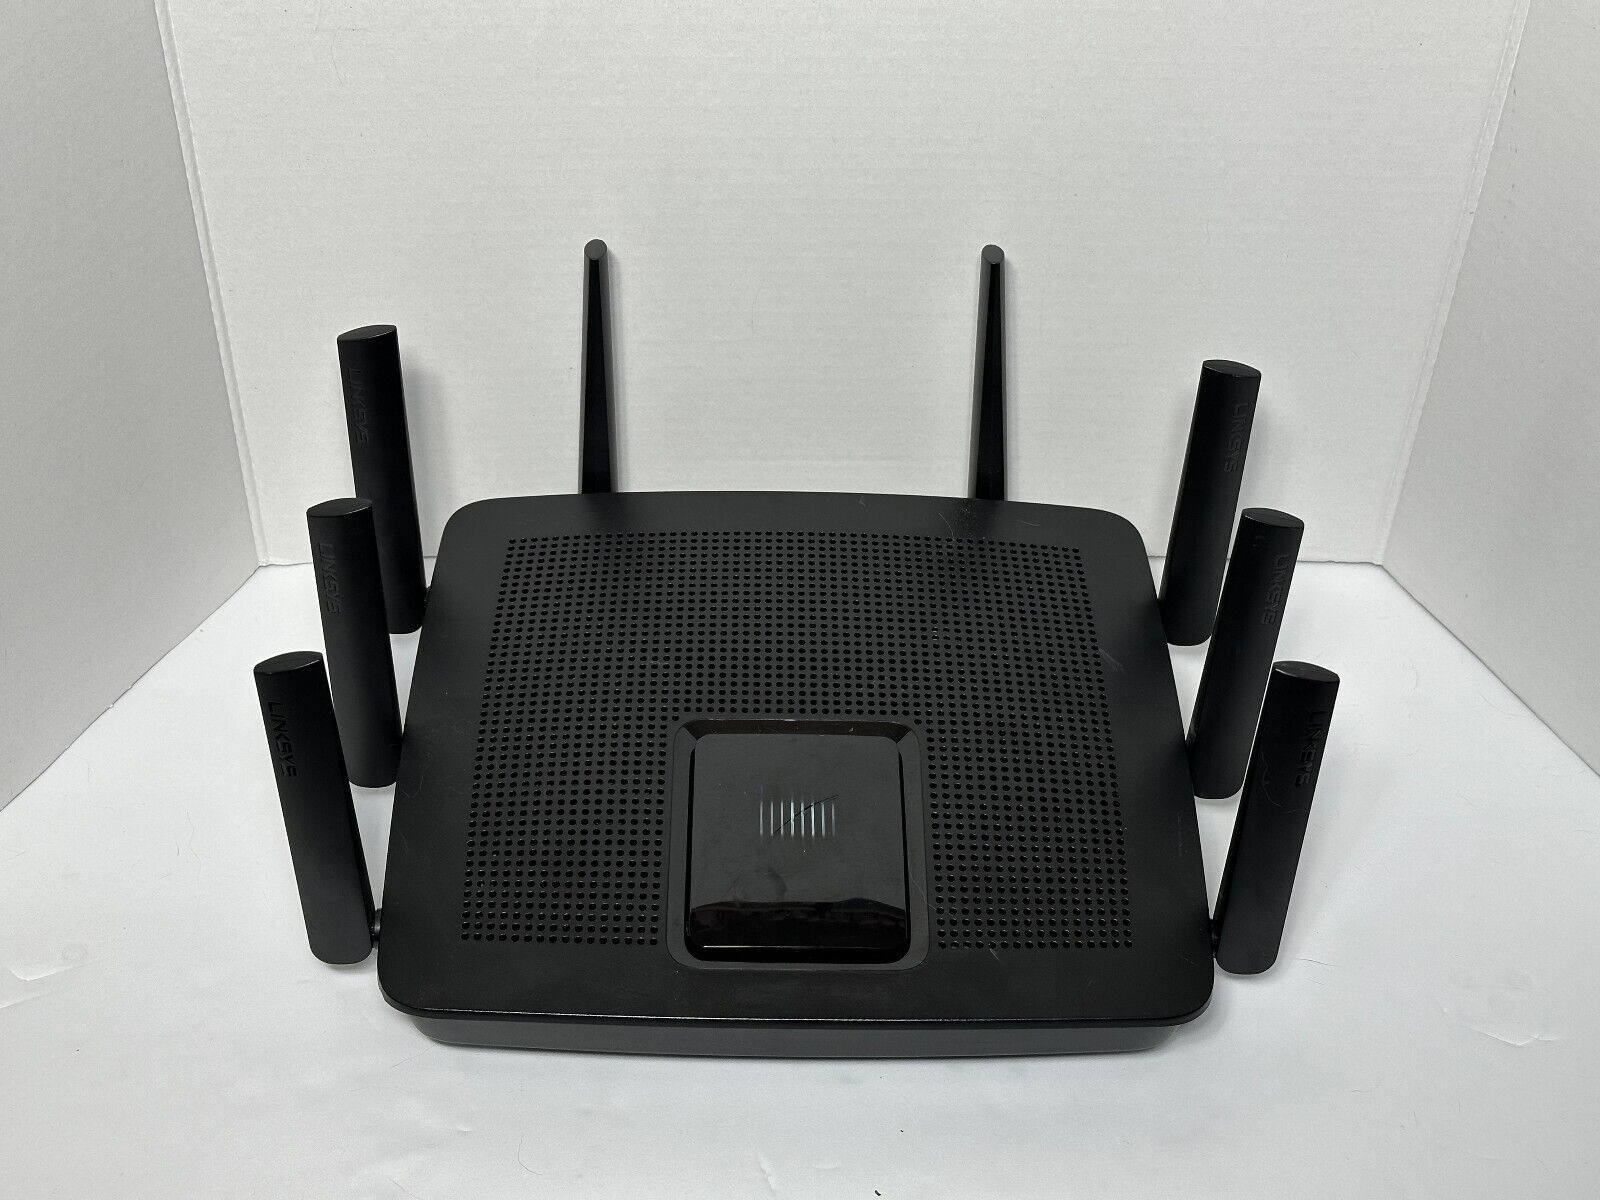 Linksys EA9500V2 Tri Band Wireless Router Works Excellent